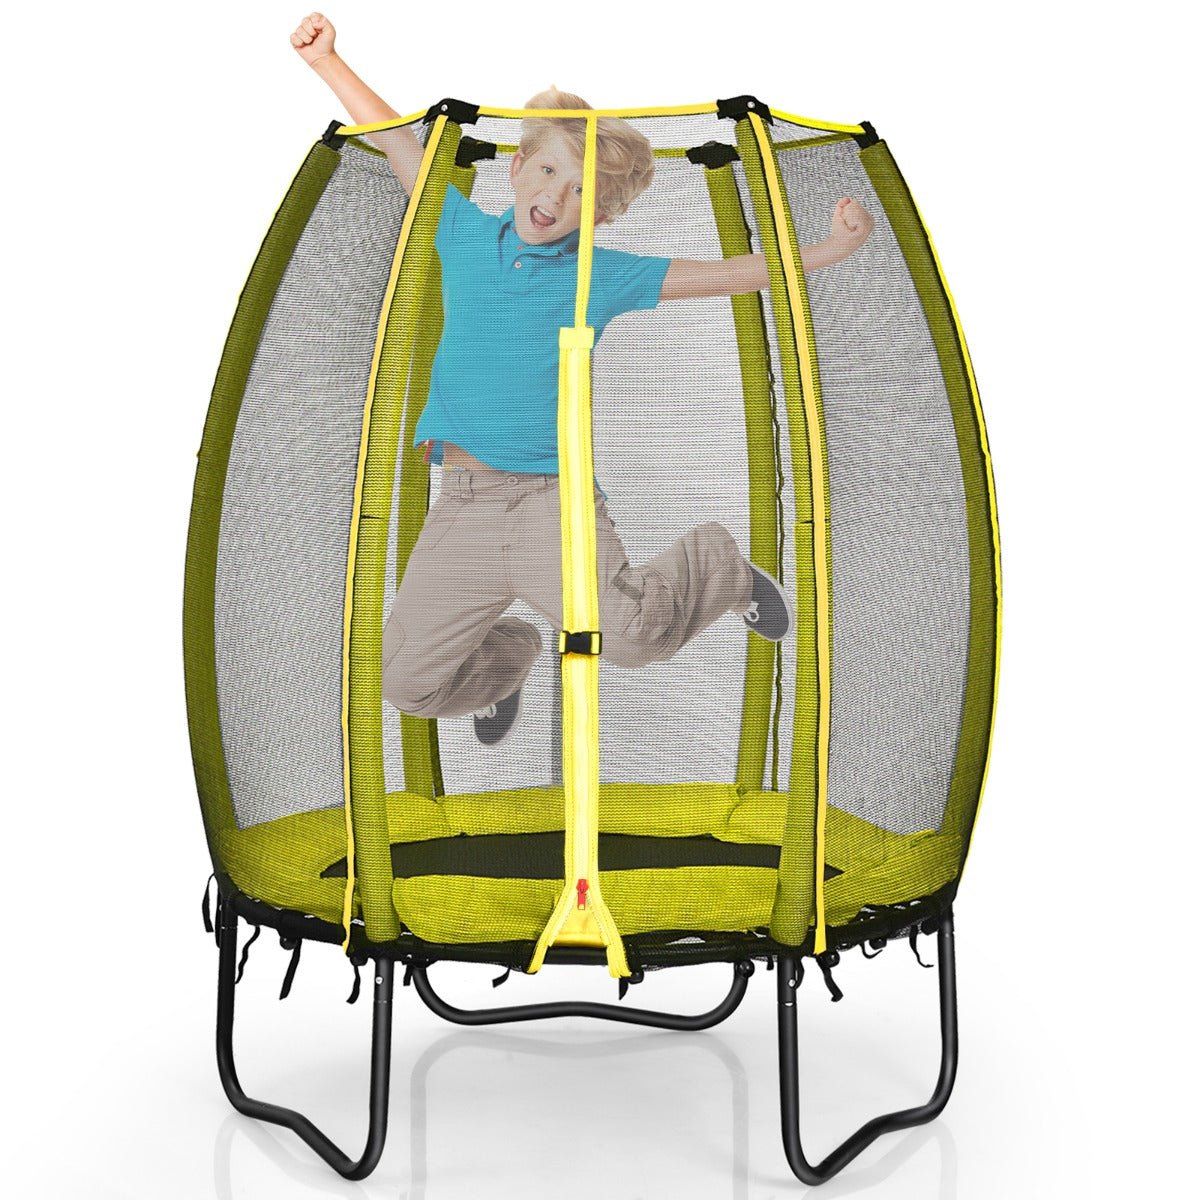 Joyful Jumps: 42 Inches Trampoline with Enclosure Net and Safety Pad